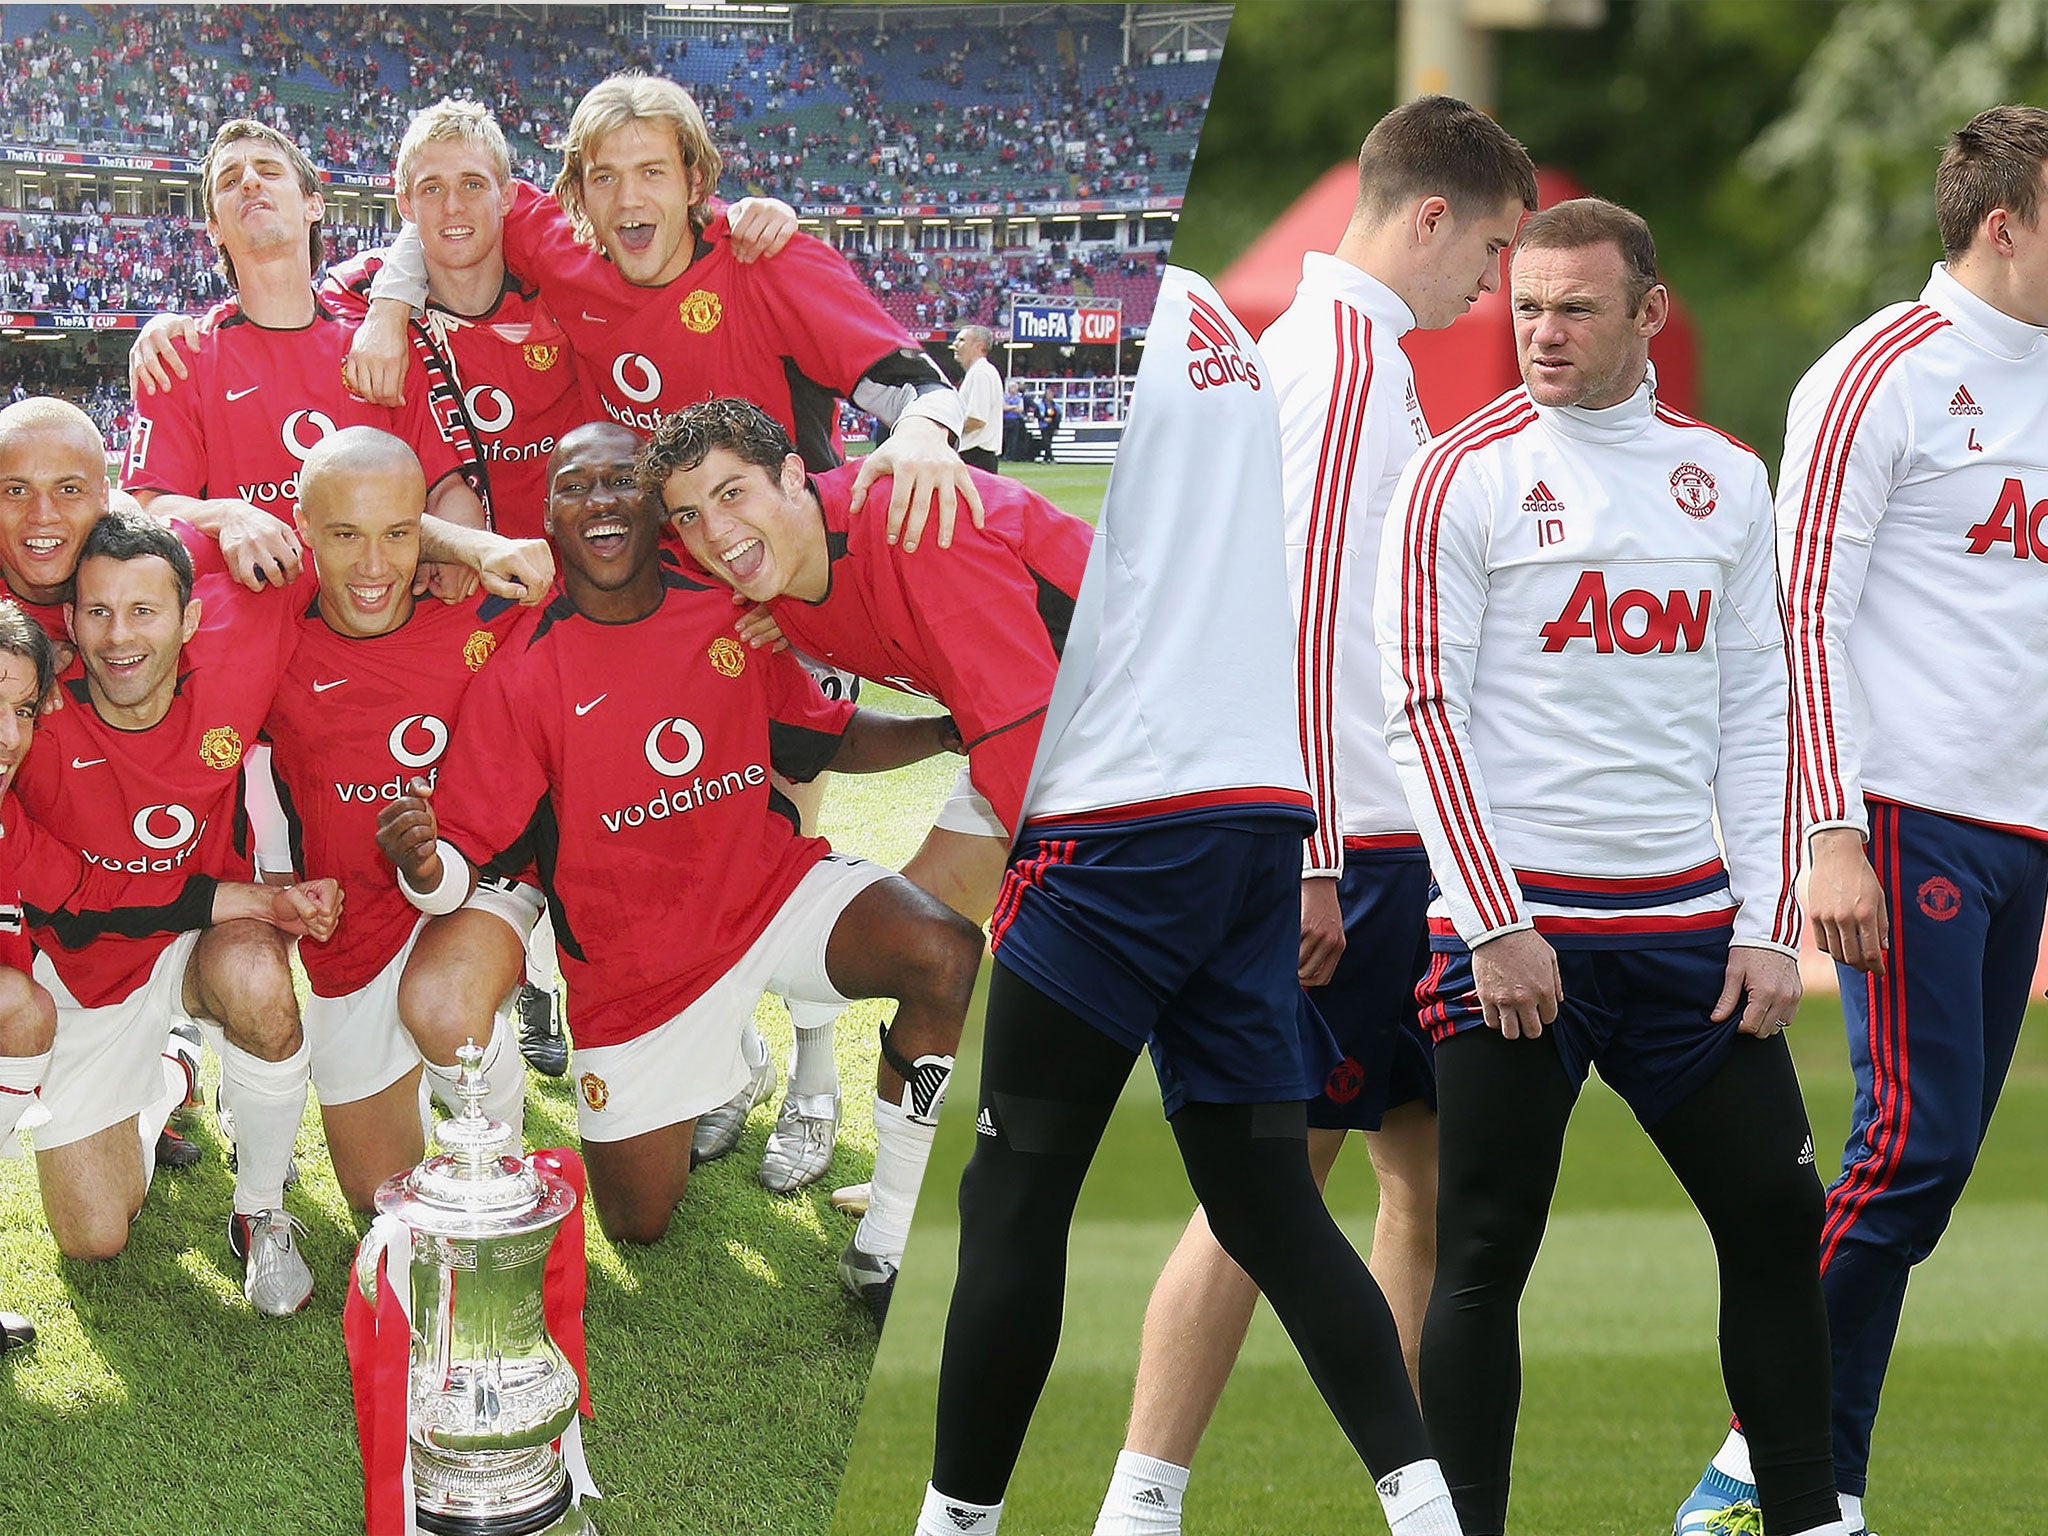 Manchester United's FA Cup winning side of 2004 and current captain Wayne Rooney